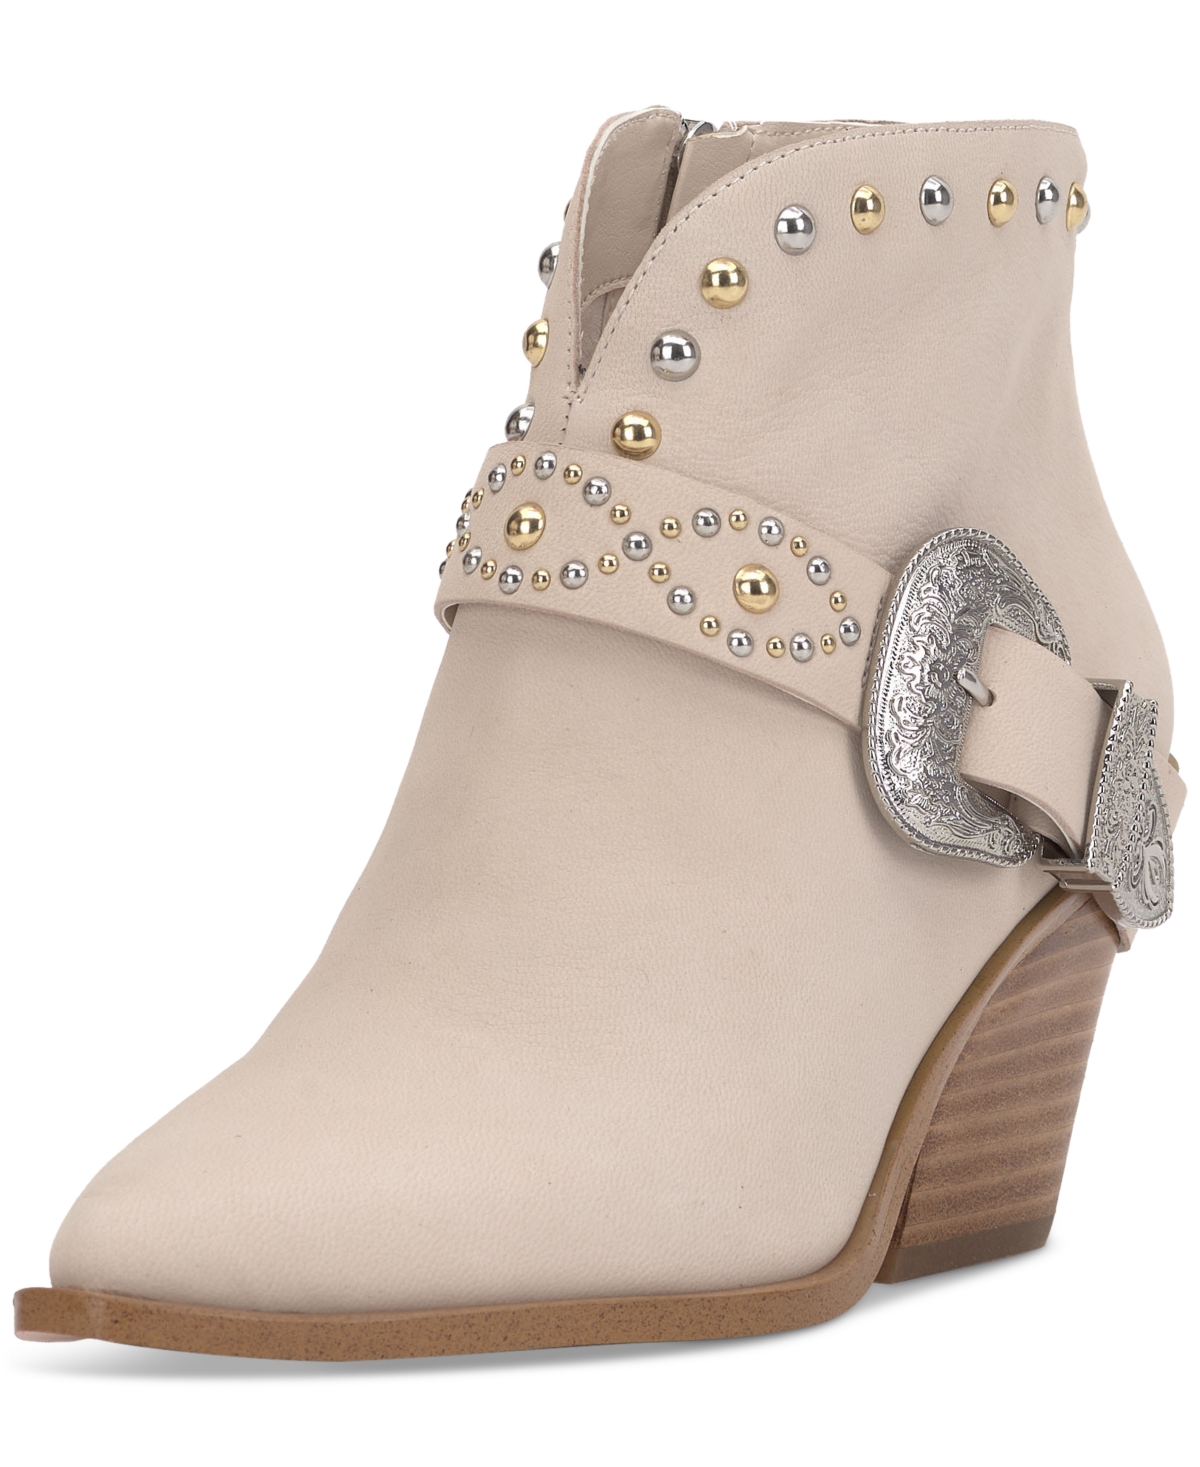 Women's Pivvy Western Booties - Chalk Leather